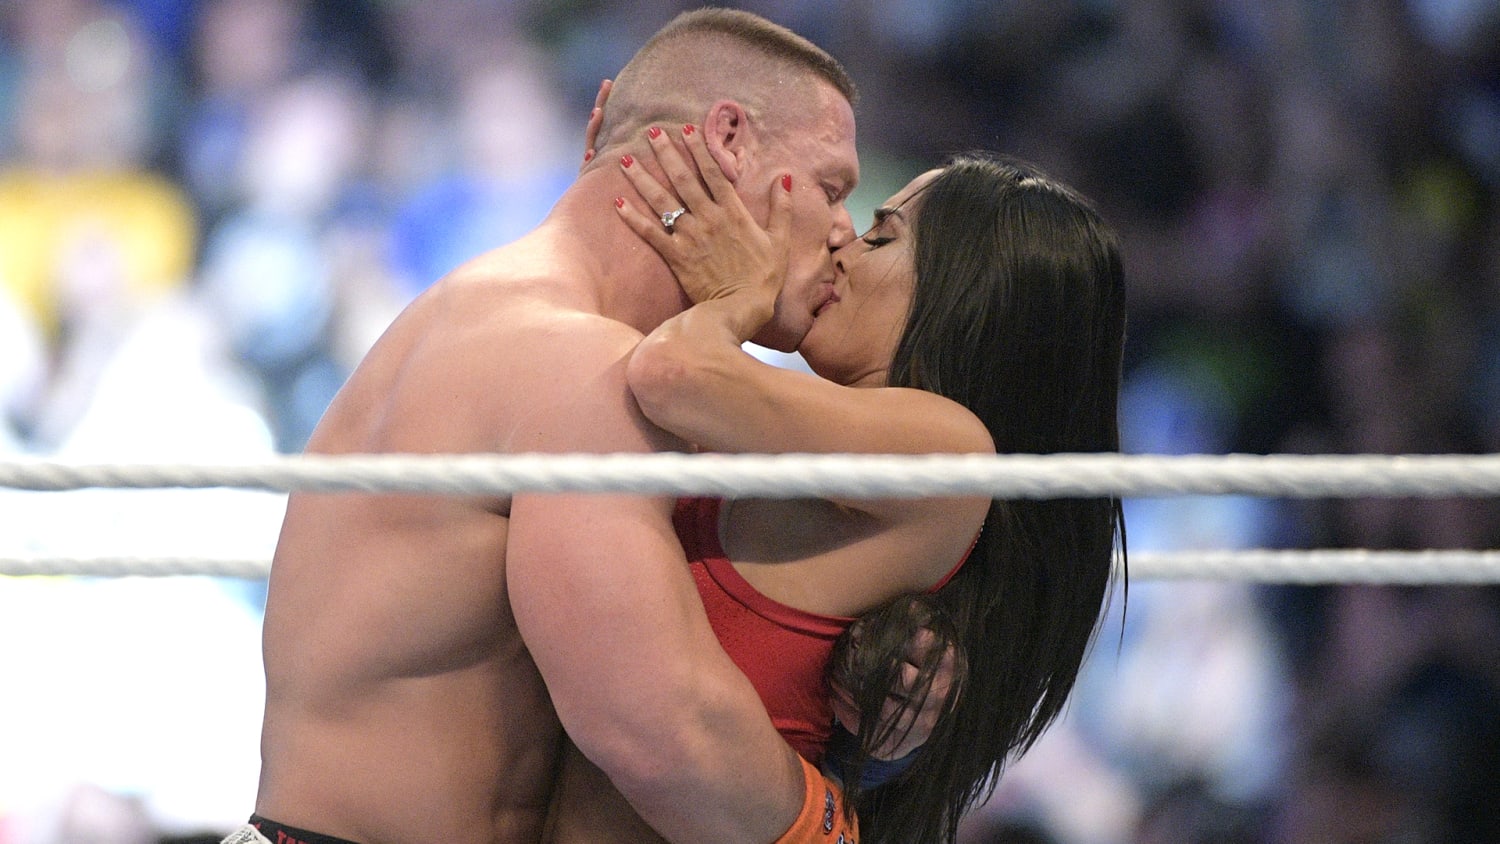 John Cena pops the question to Nikki Bella at WrestleMania 33 â€” and she  said yes!